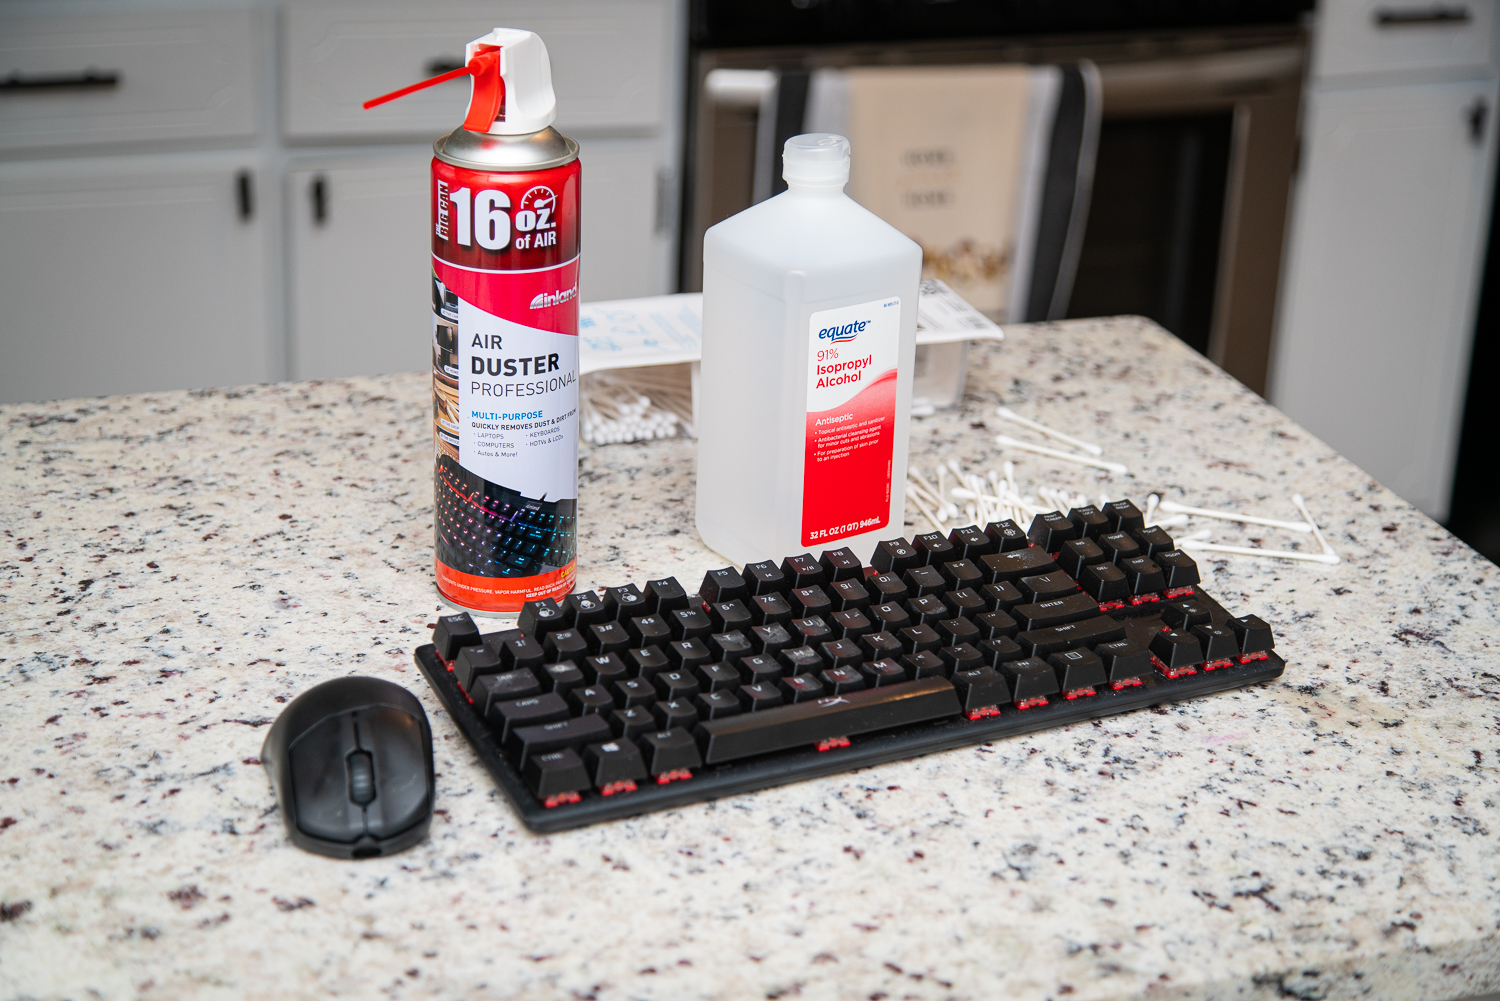 how to clean your keyboard and mouse 15